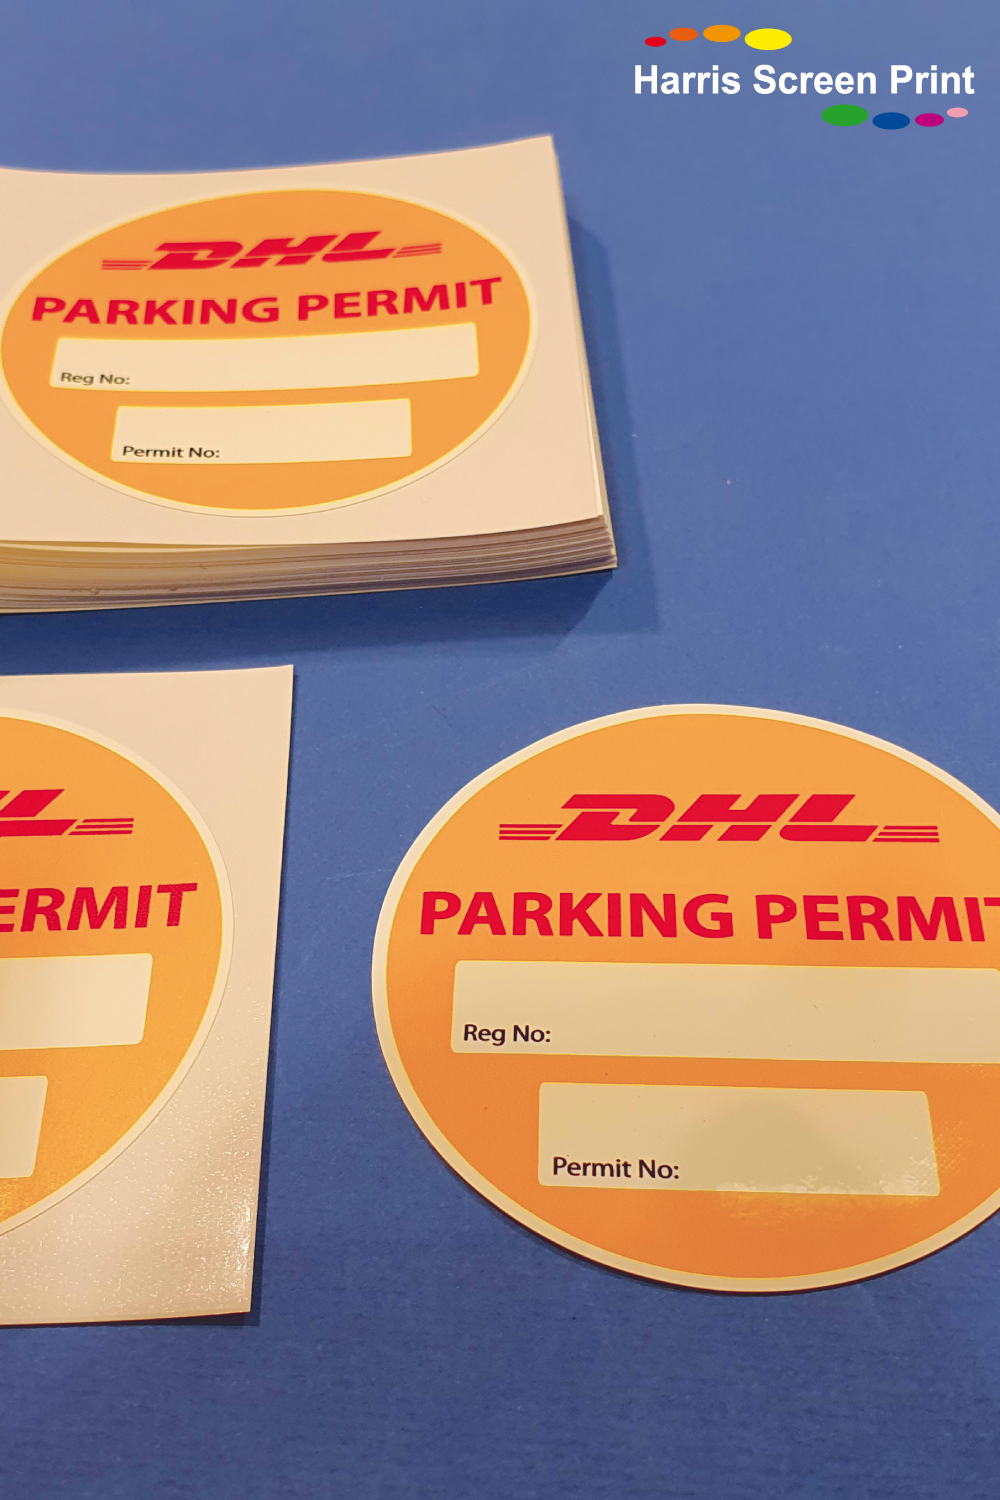 Cling Parking Permits for DHL